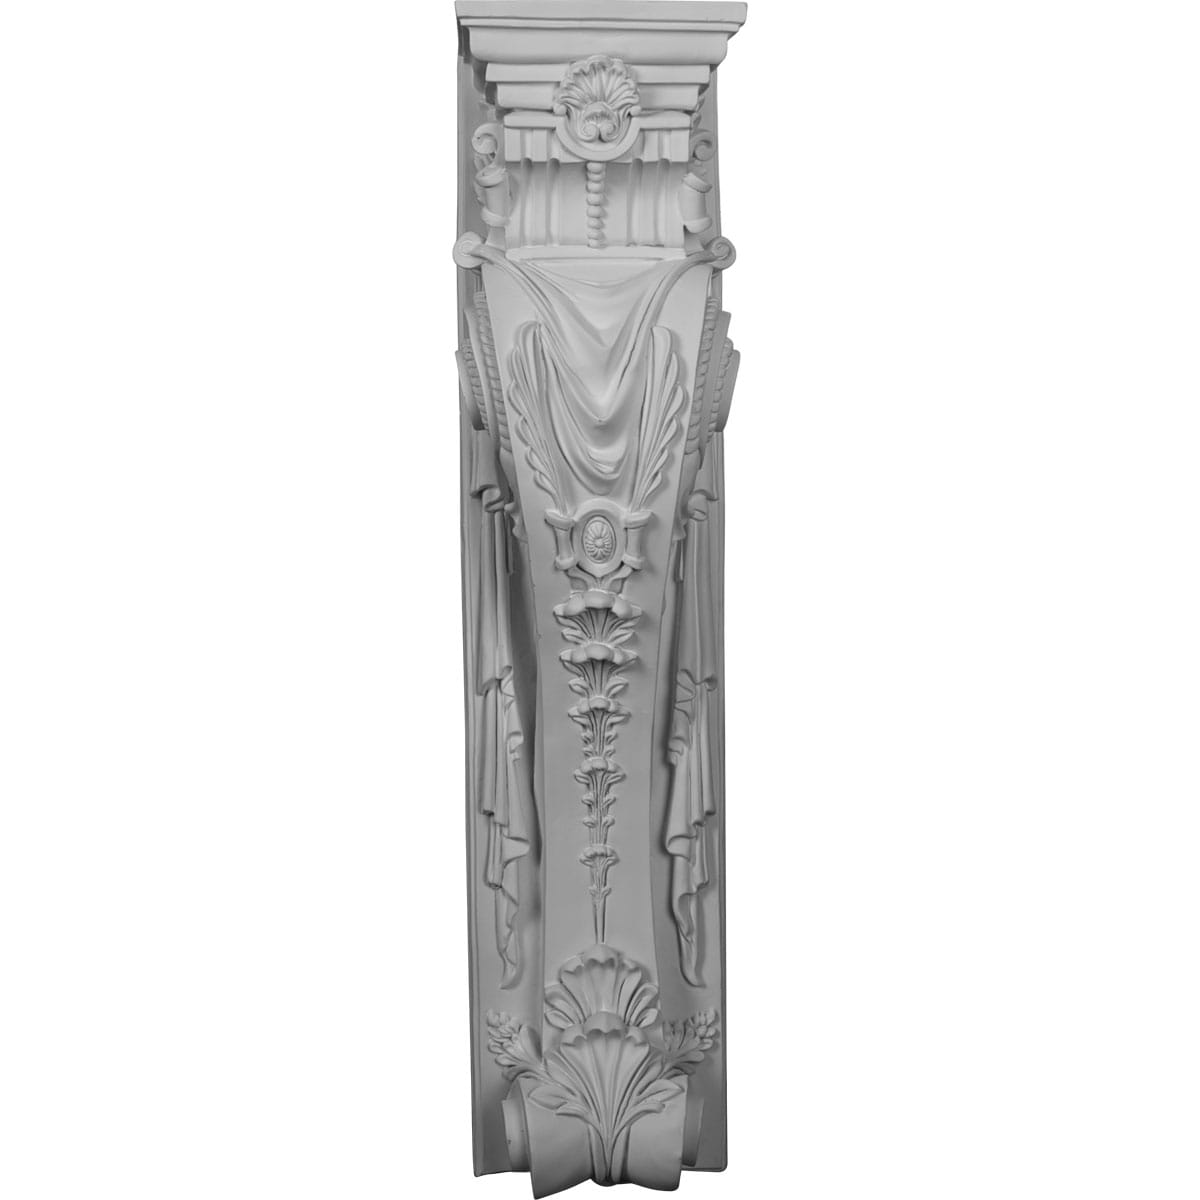 Pilaster Fireplace Surrounds & Pilasters at Lowes.com